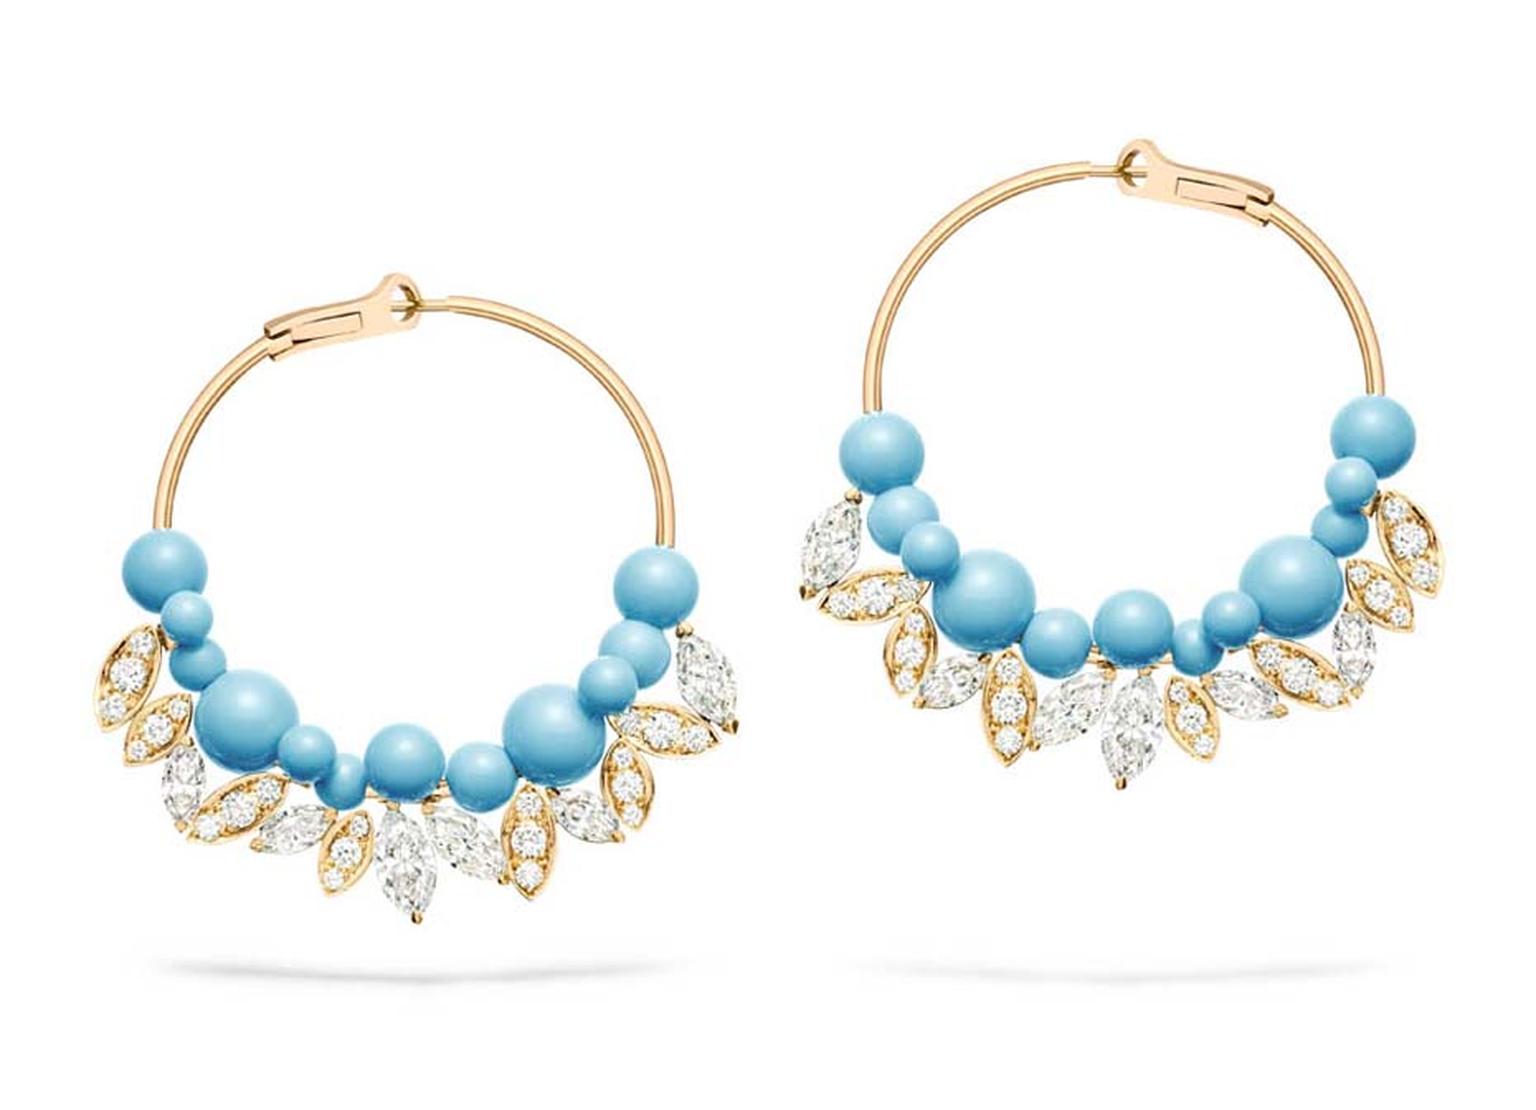 Piaget turquoise earrings from the Extremely Piaget collection.